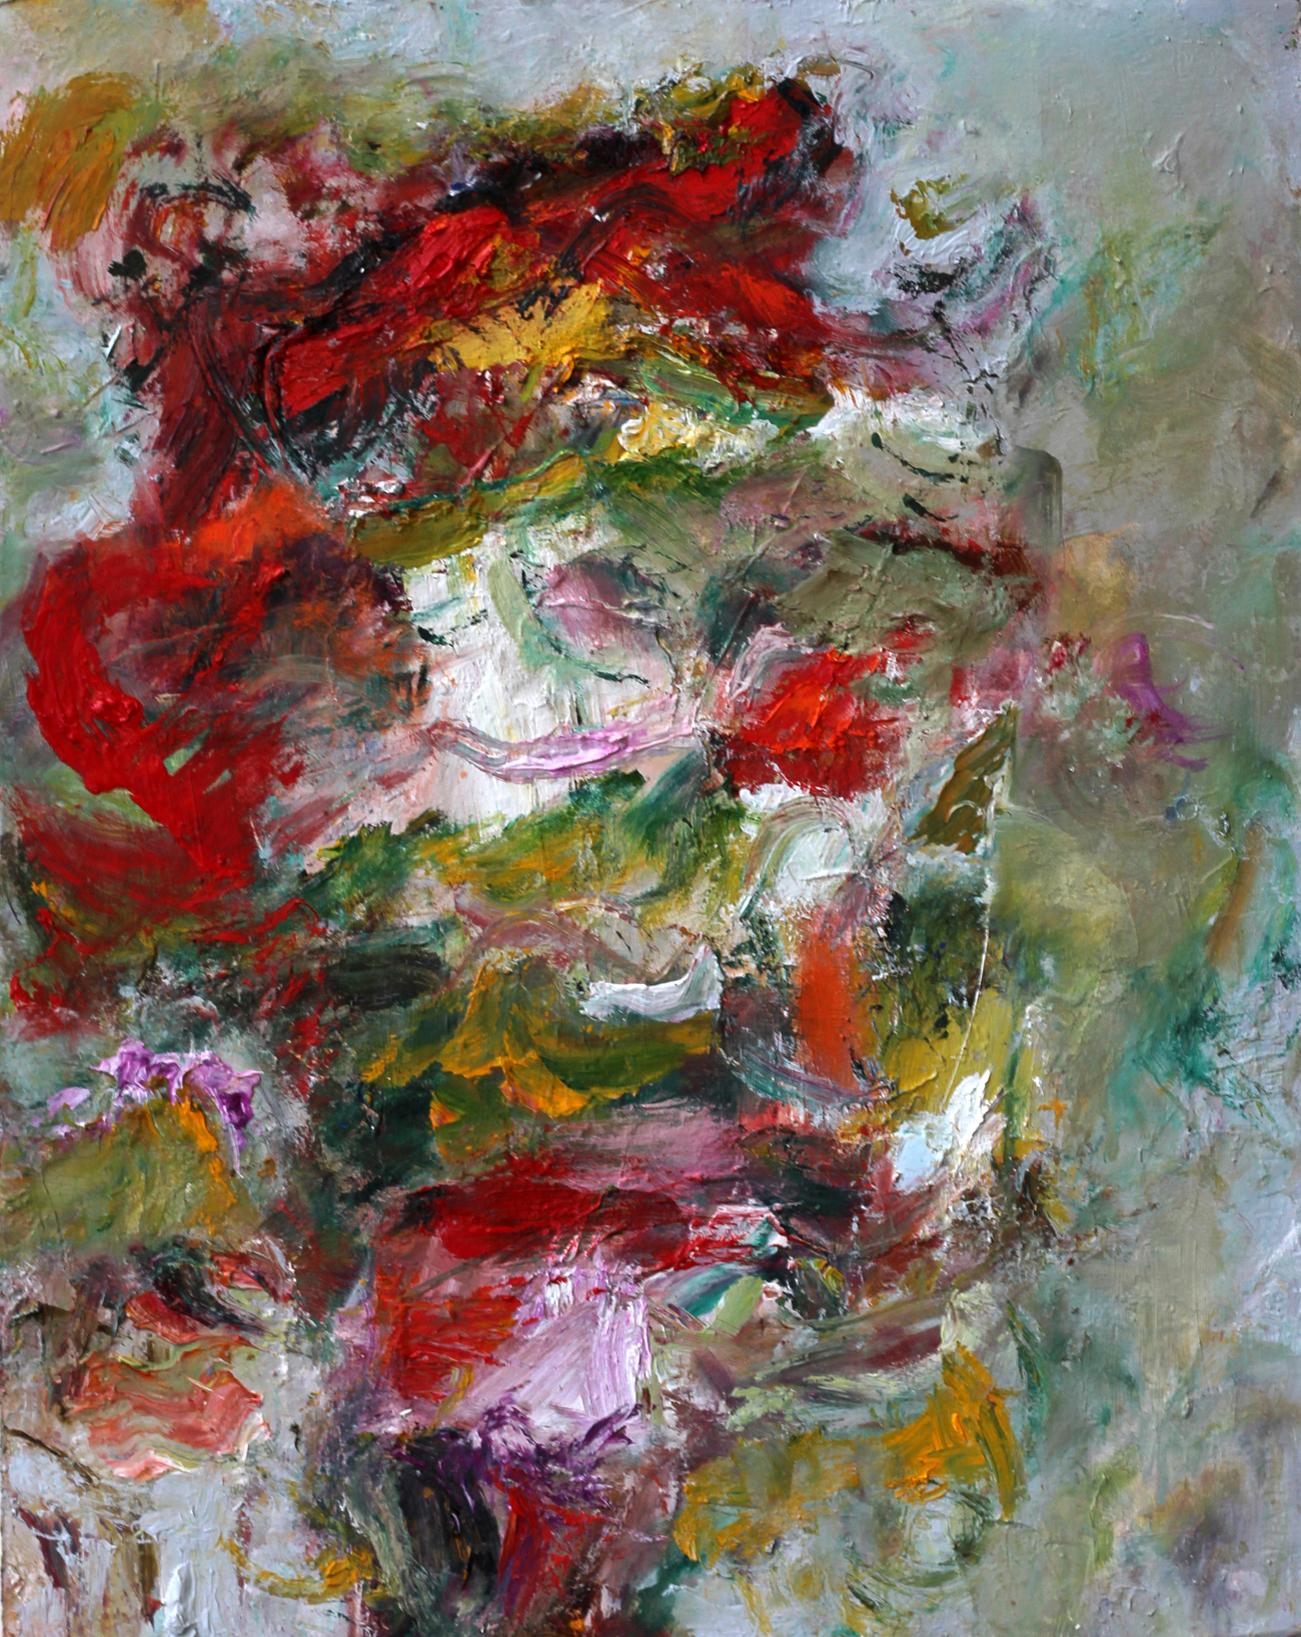 "Unearthing", abstract, texture, multi-colored, reds, greens, grey, oil painting